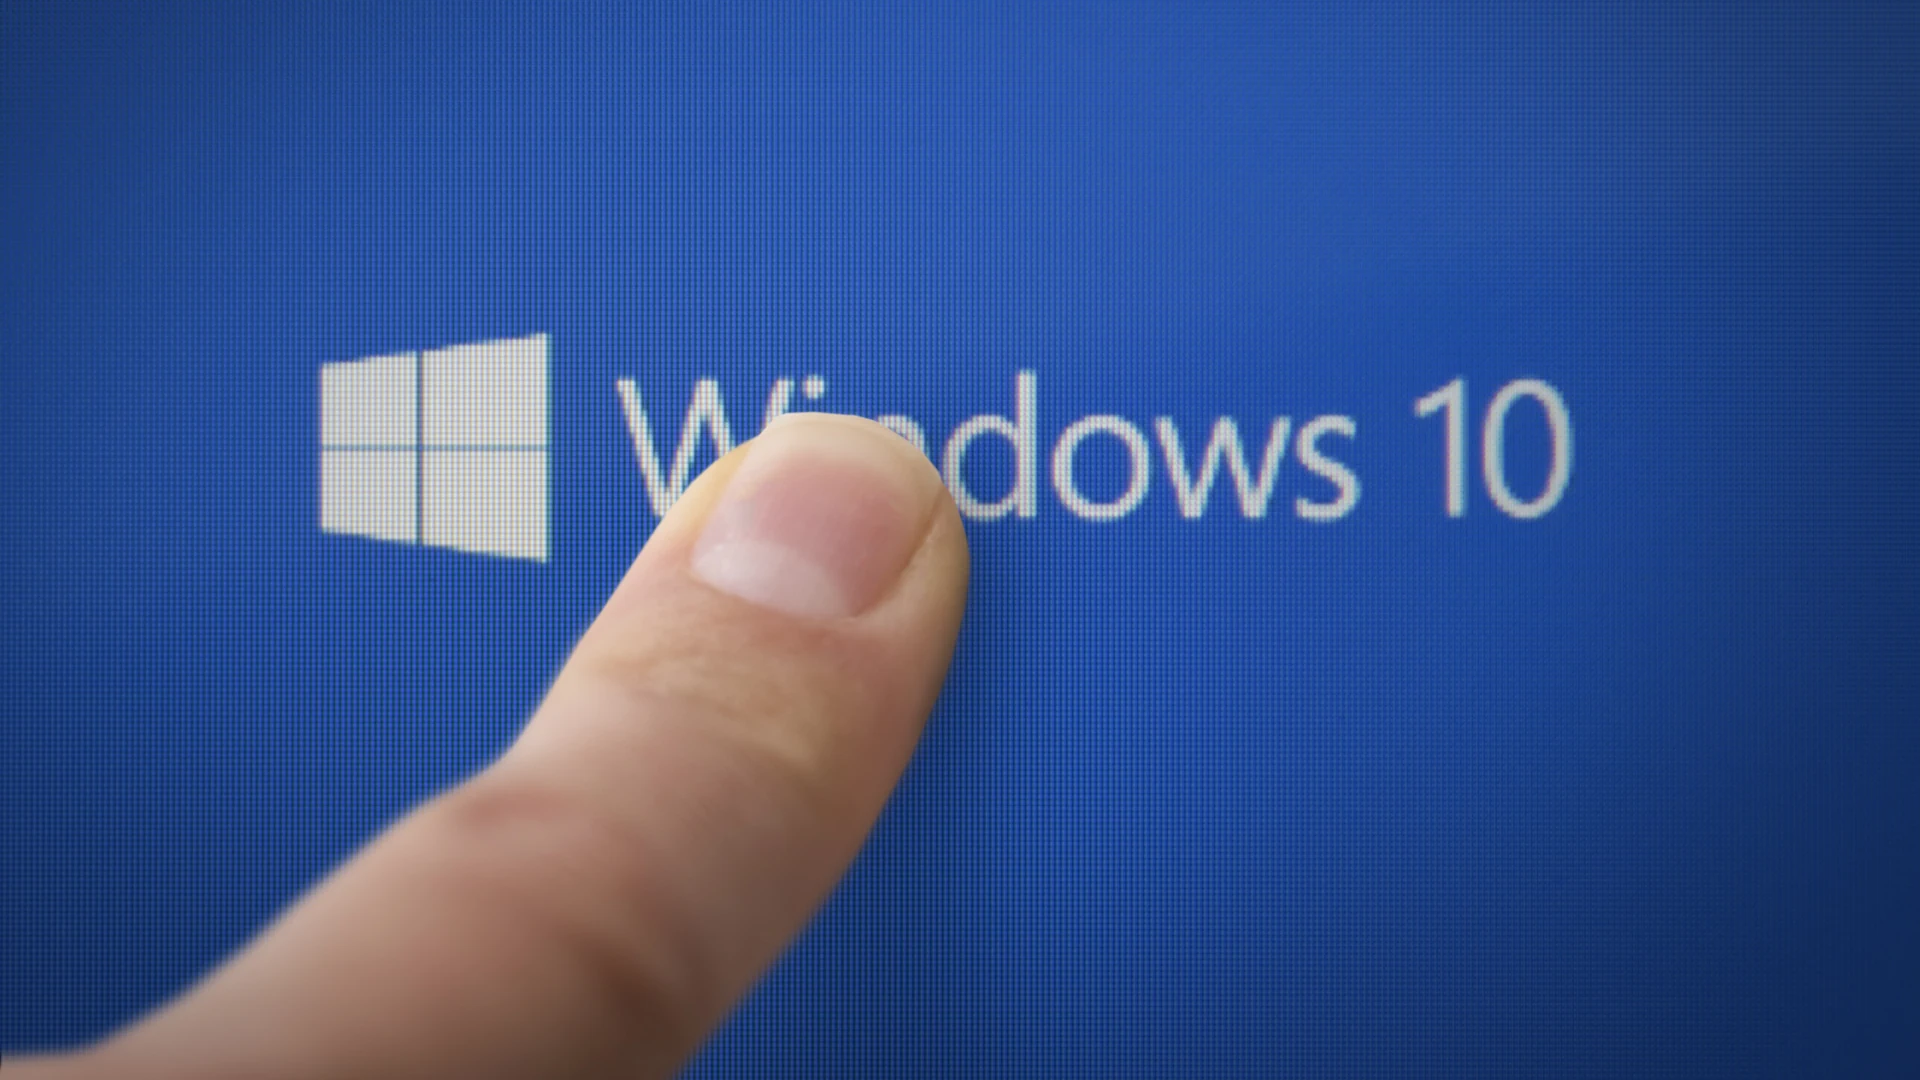 It’s Windows 11’s second birthday, and it’s still far behind Windows 10 in terms of popularity